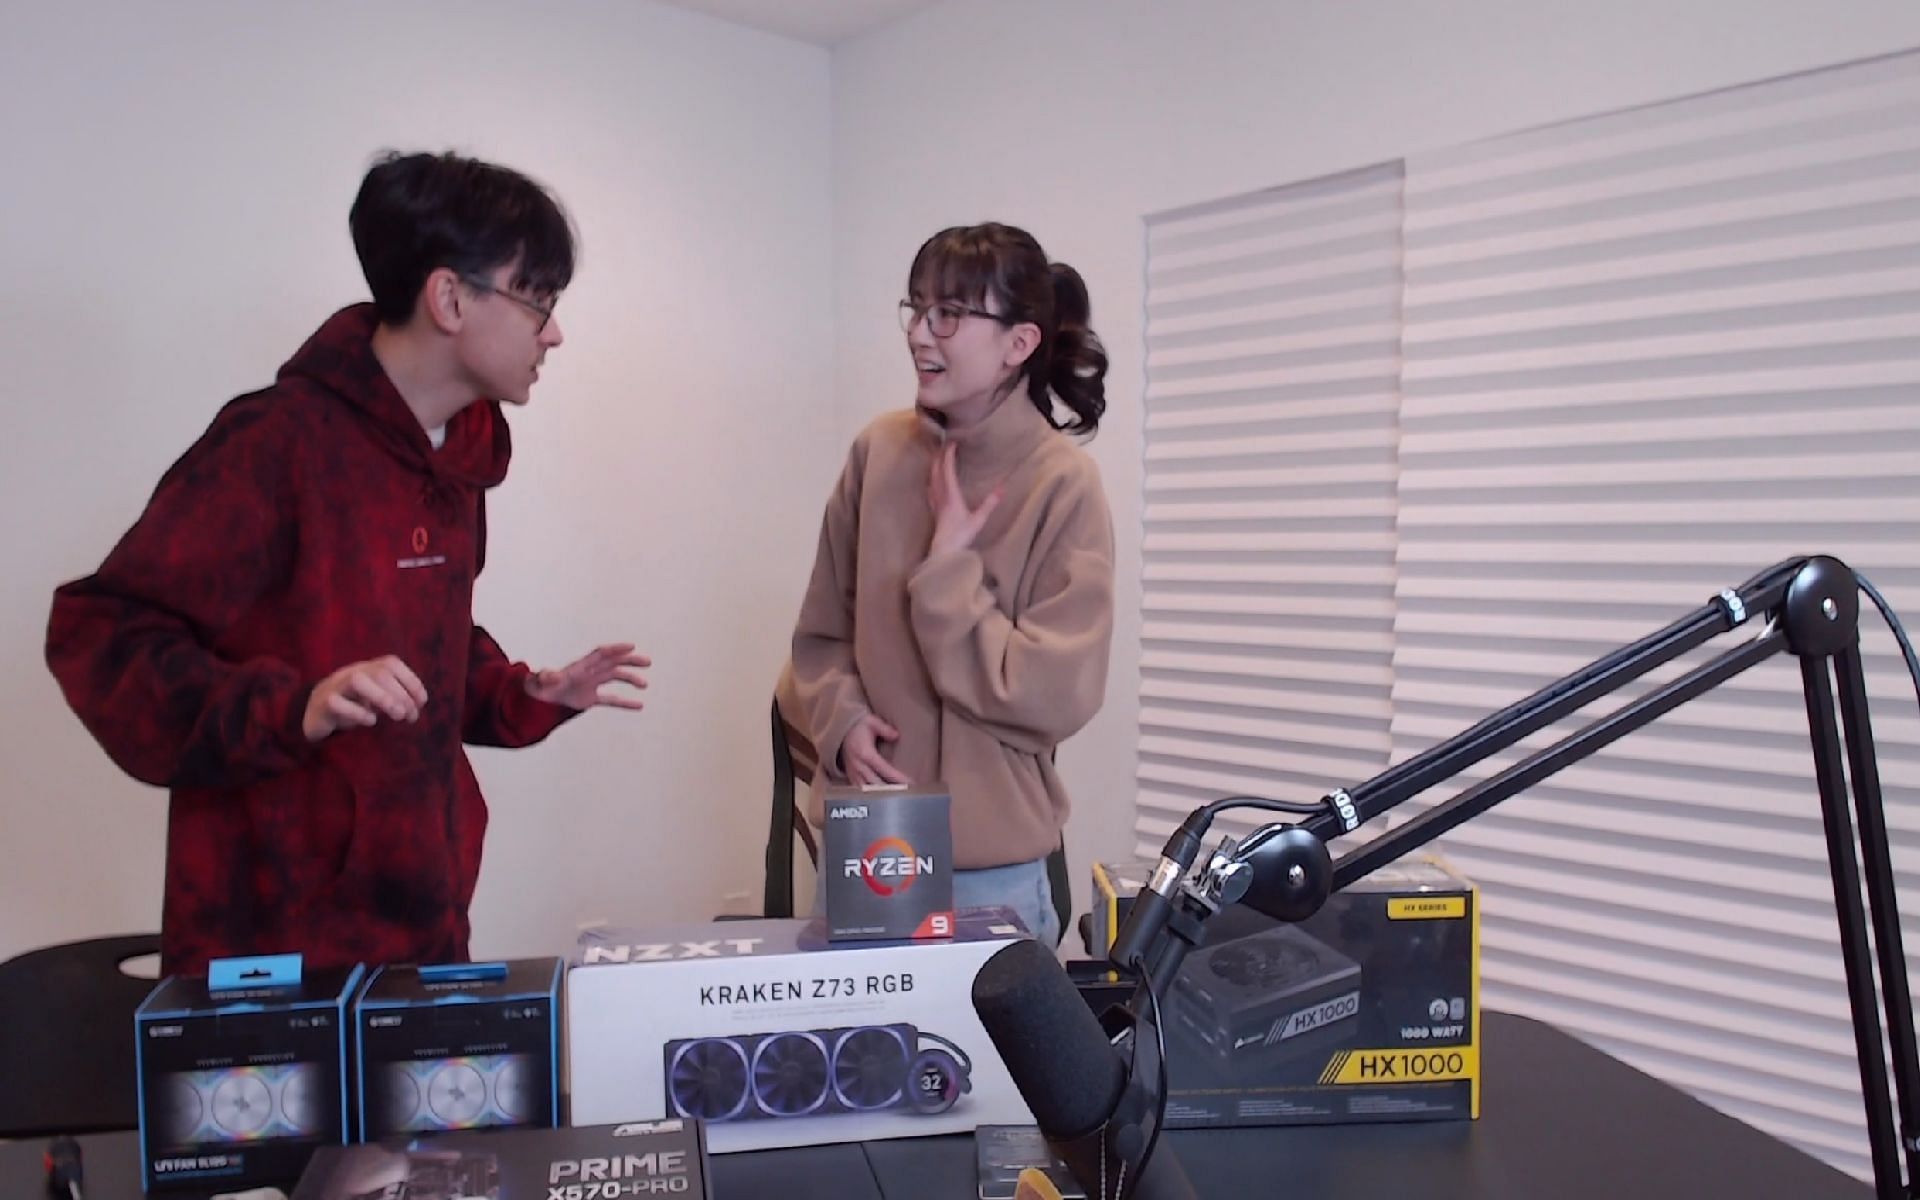 Twitch streamer Kyedae drops a $3,000 graphics card (Images via Twitch/Kyedae)